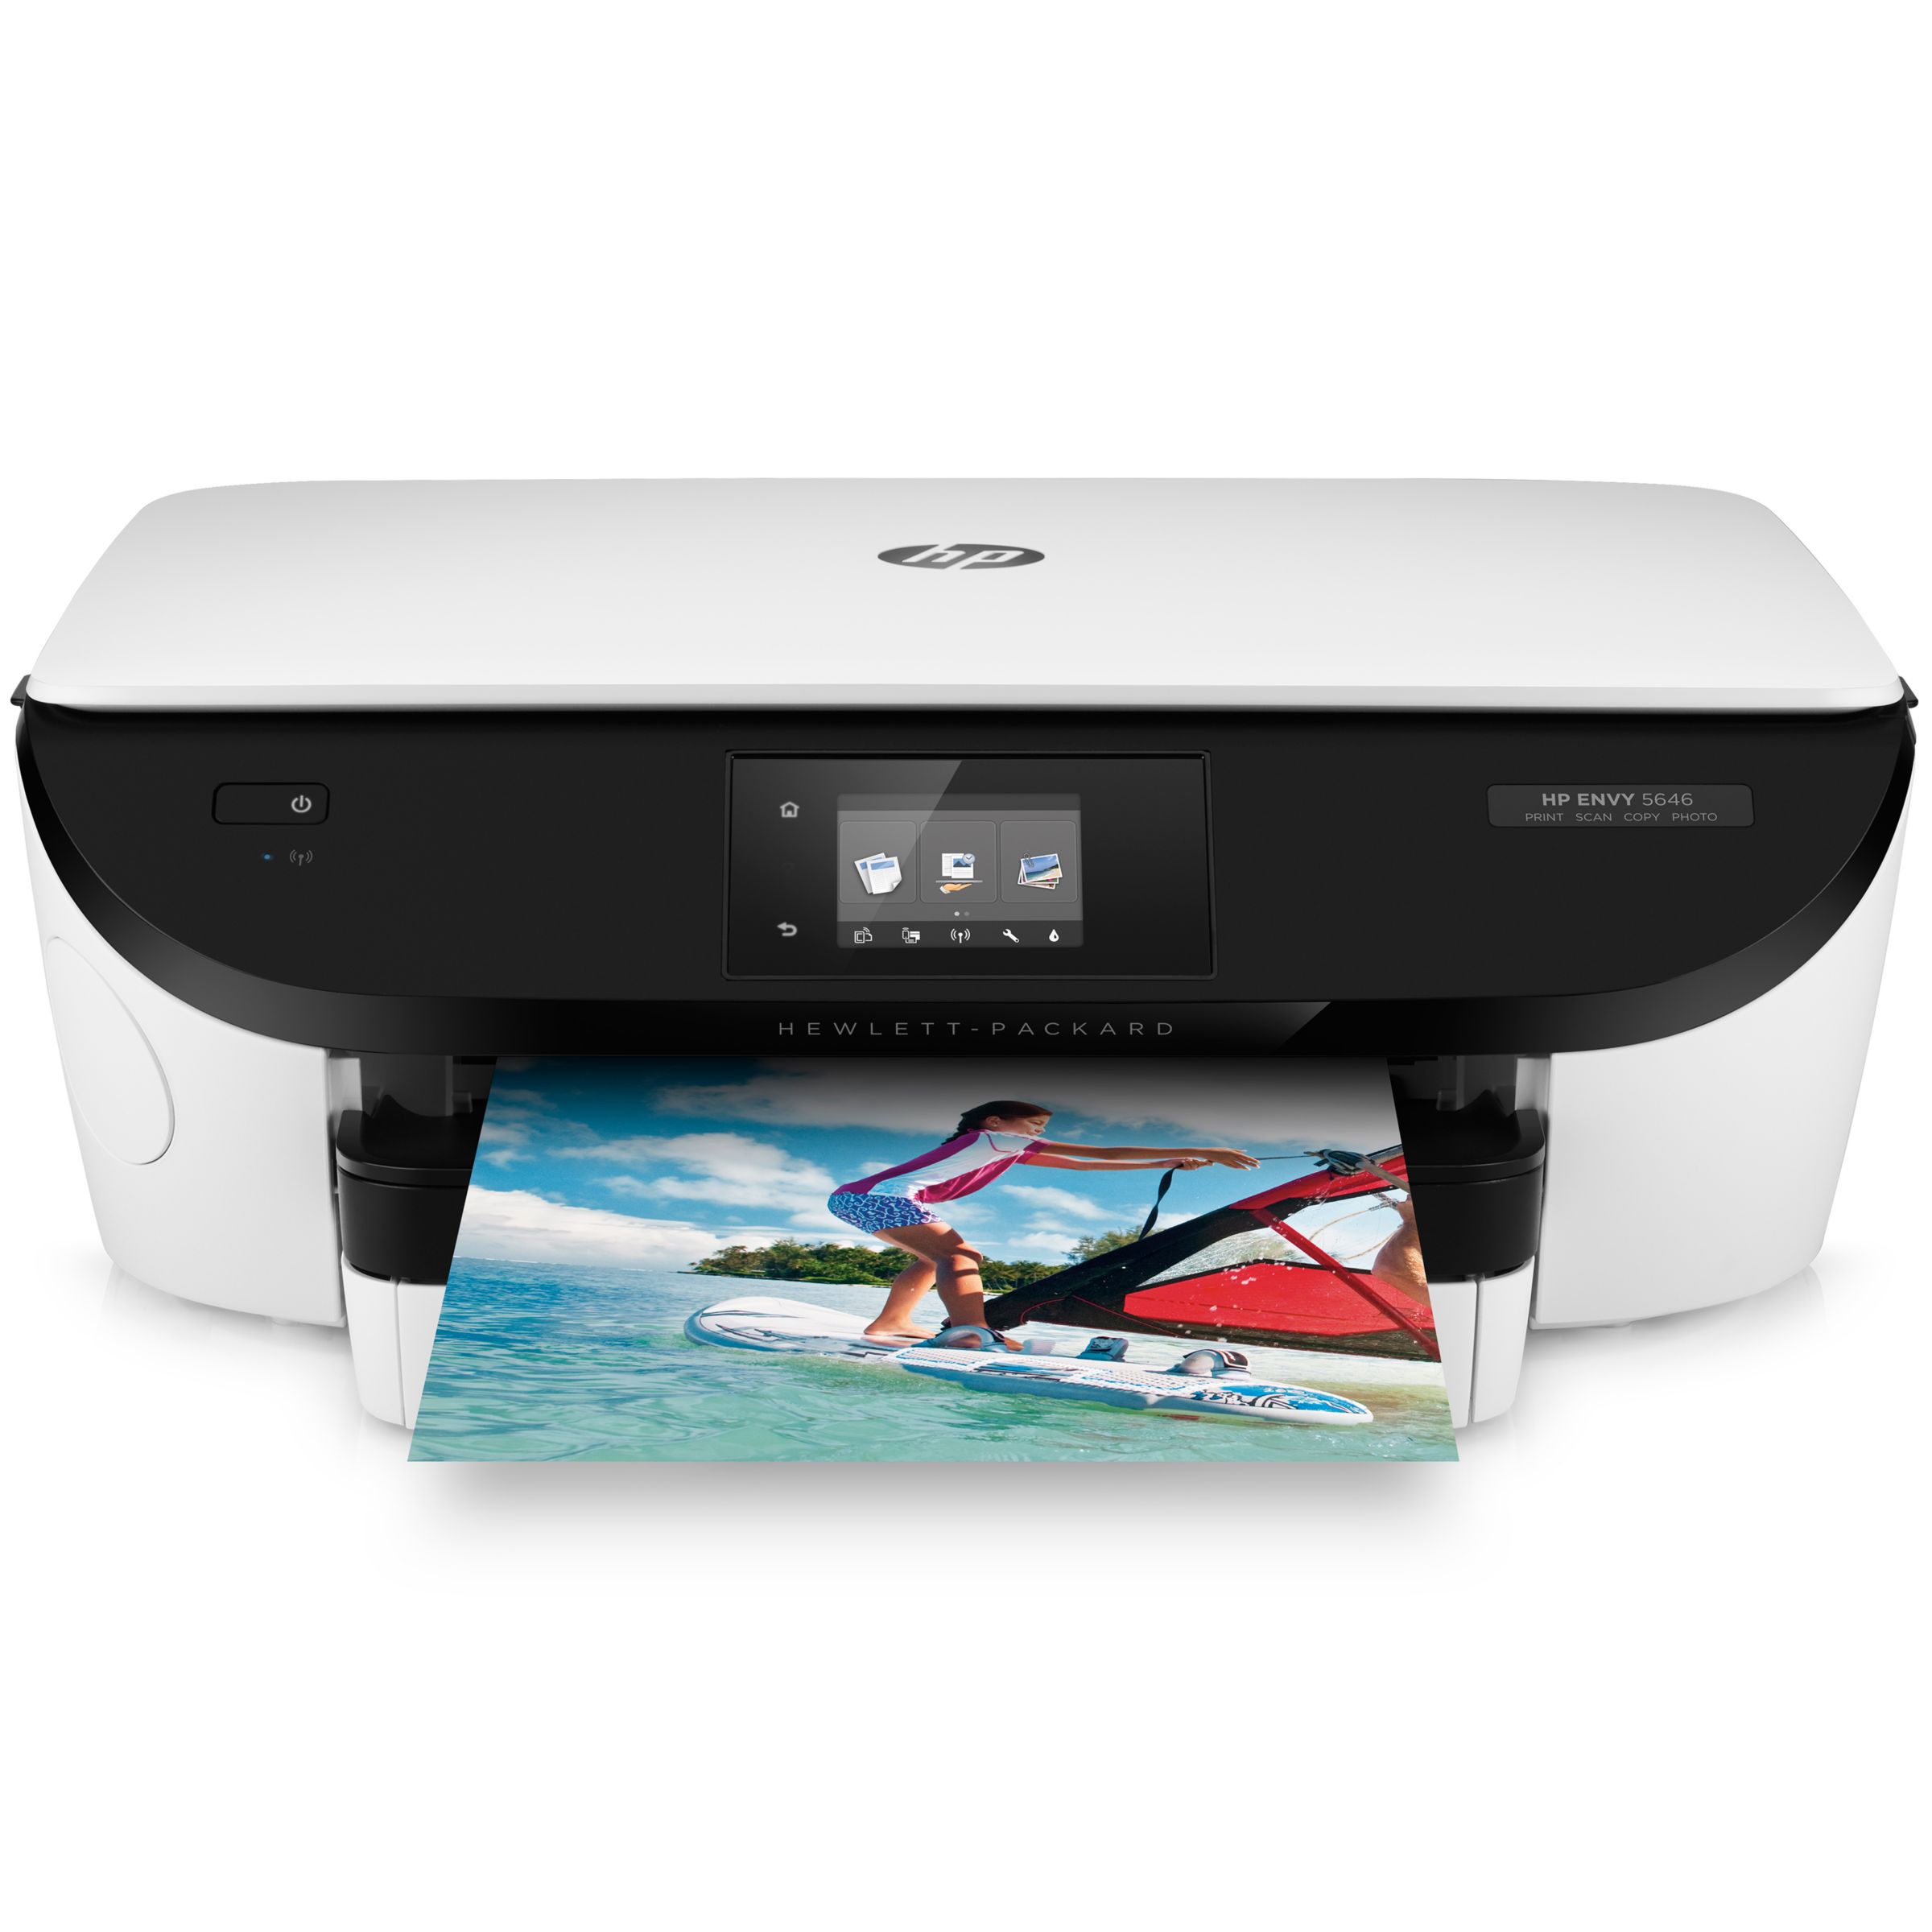 HP ENVY 5646 All-in-One Wireless Printer, HP Instant Ink Compatible